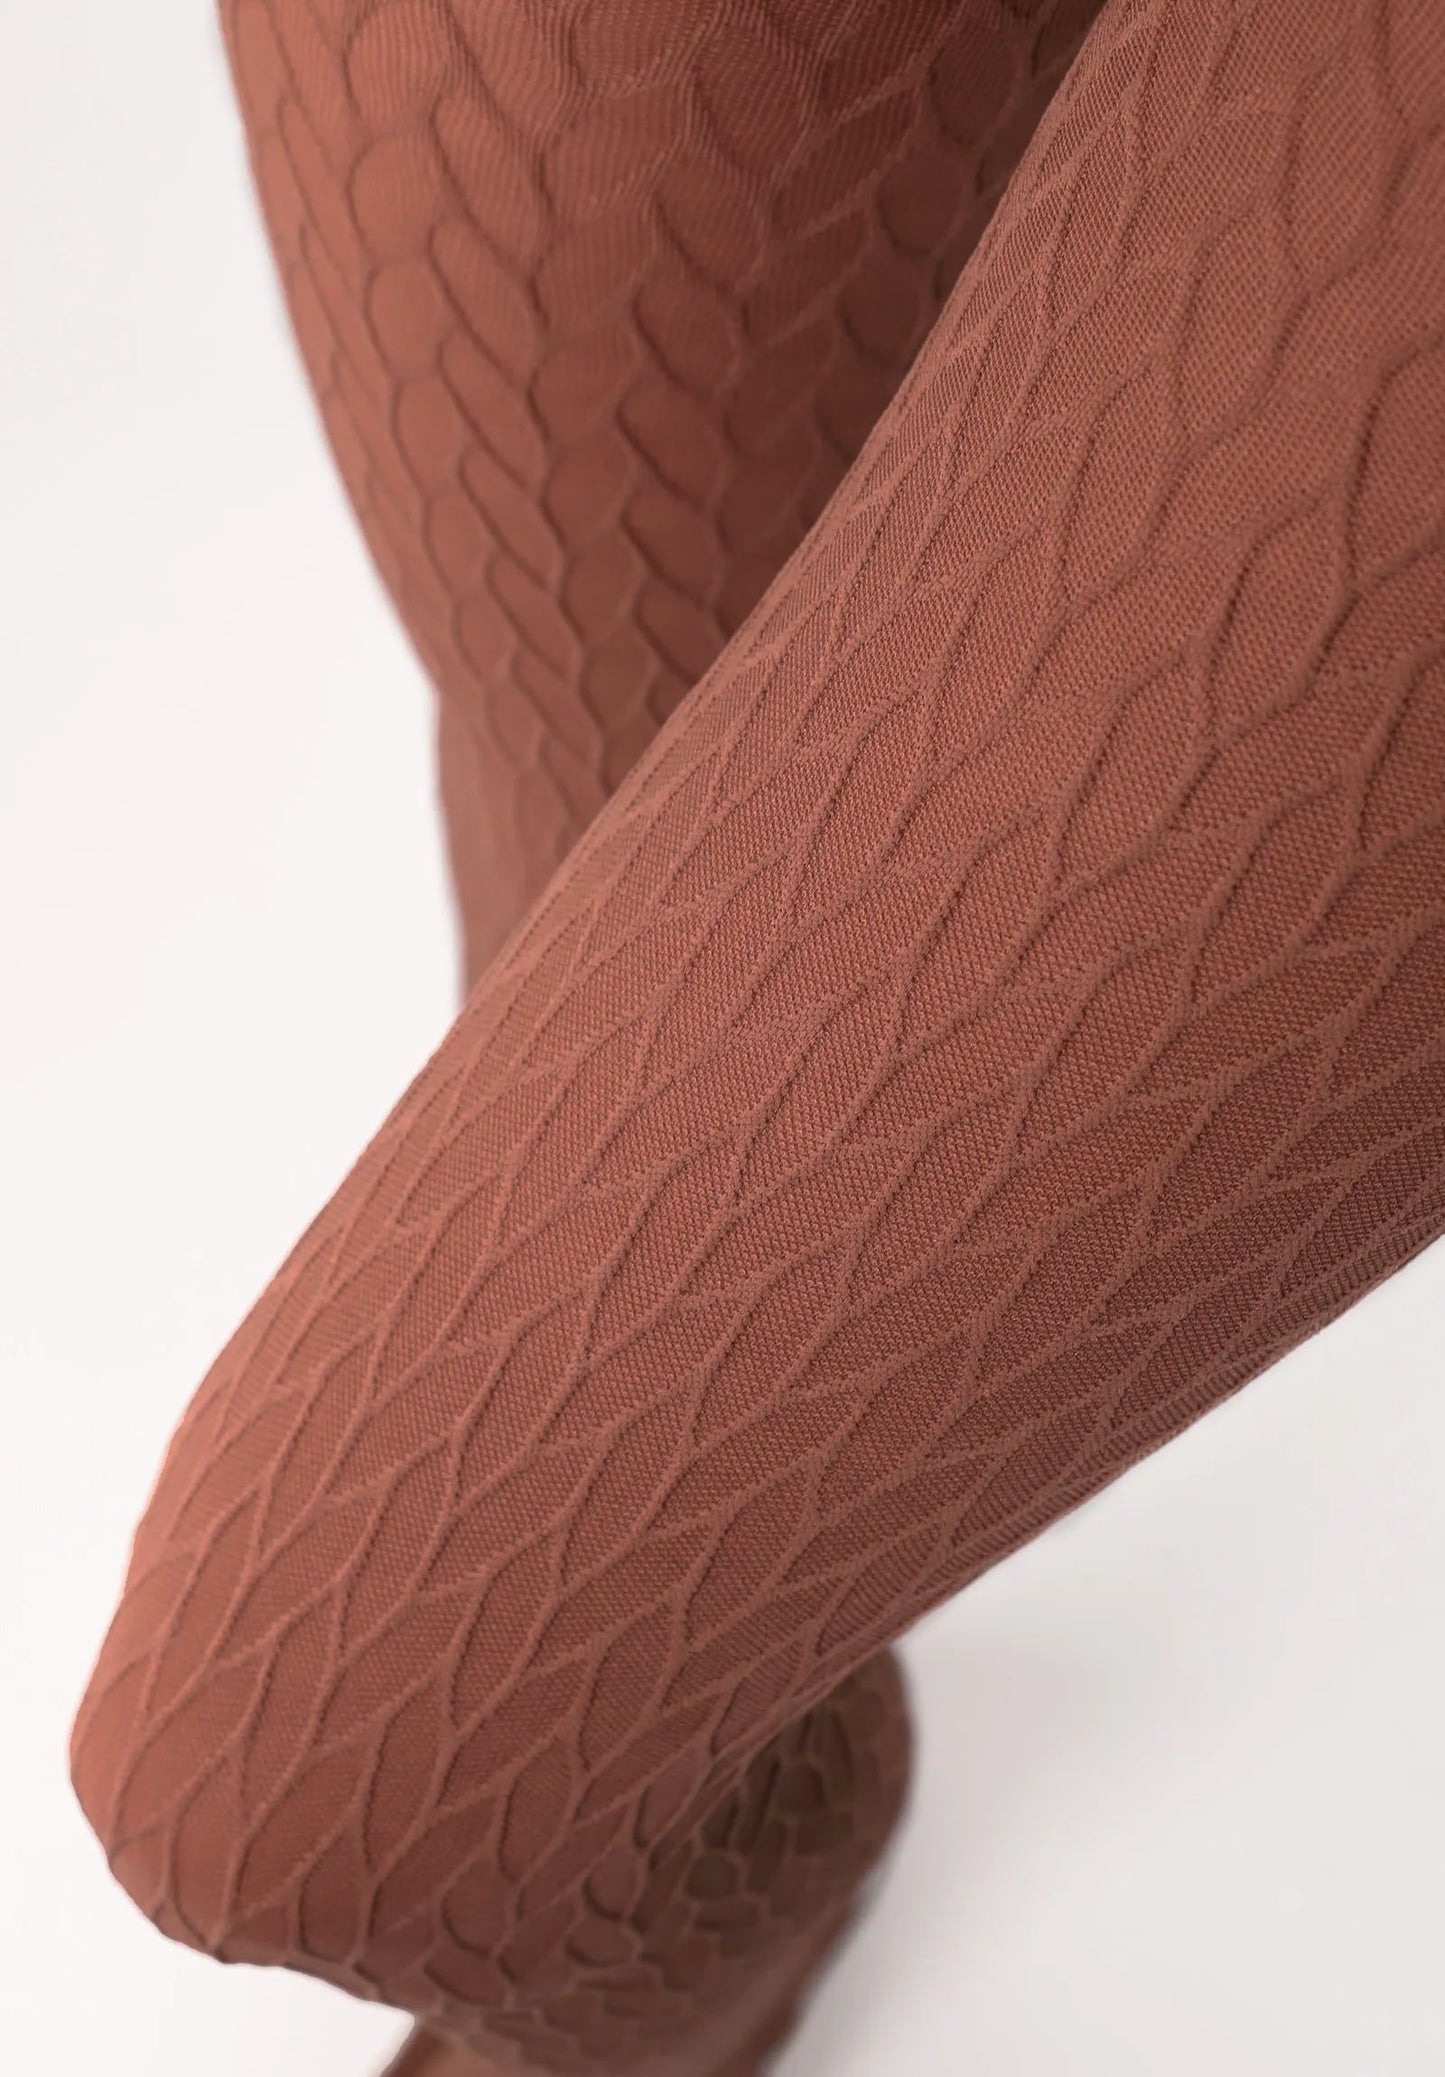 Oroblù Winding Tights - Light brown opaque fashion tights with an all over subtle braided cable knit style textured pattern